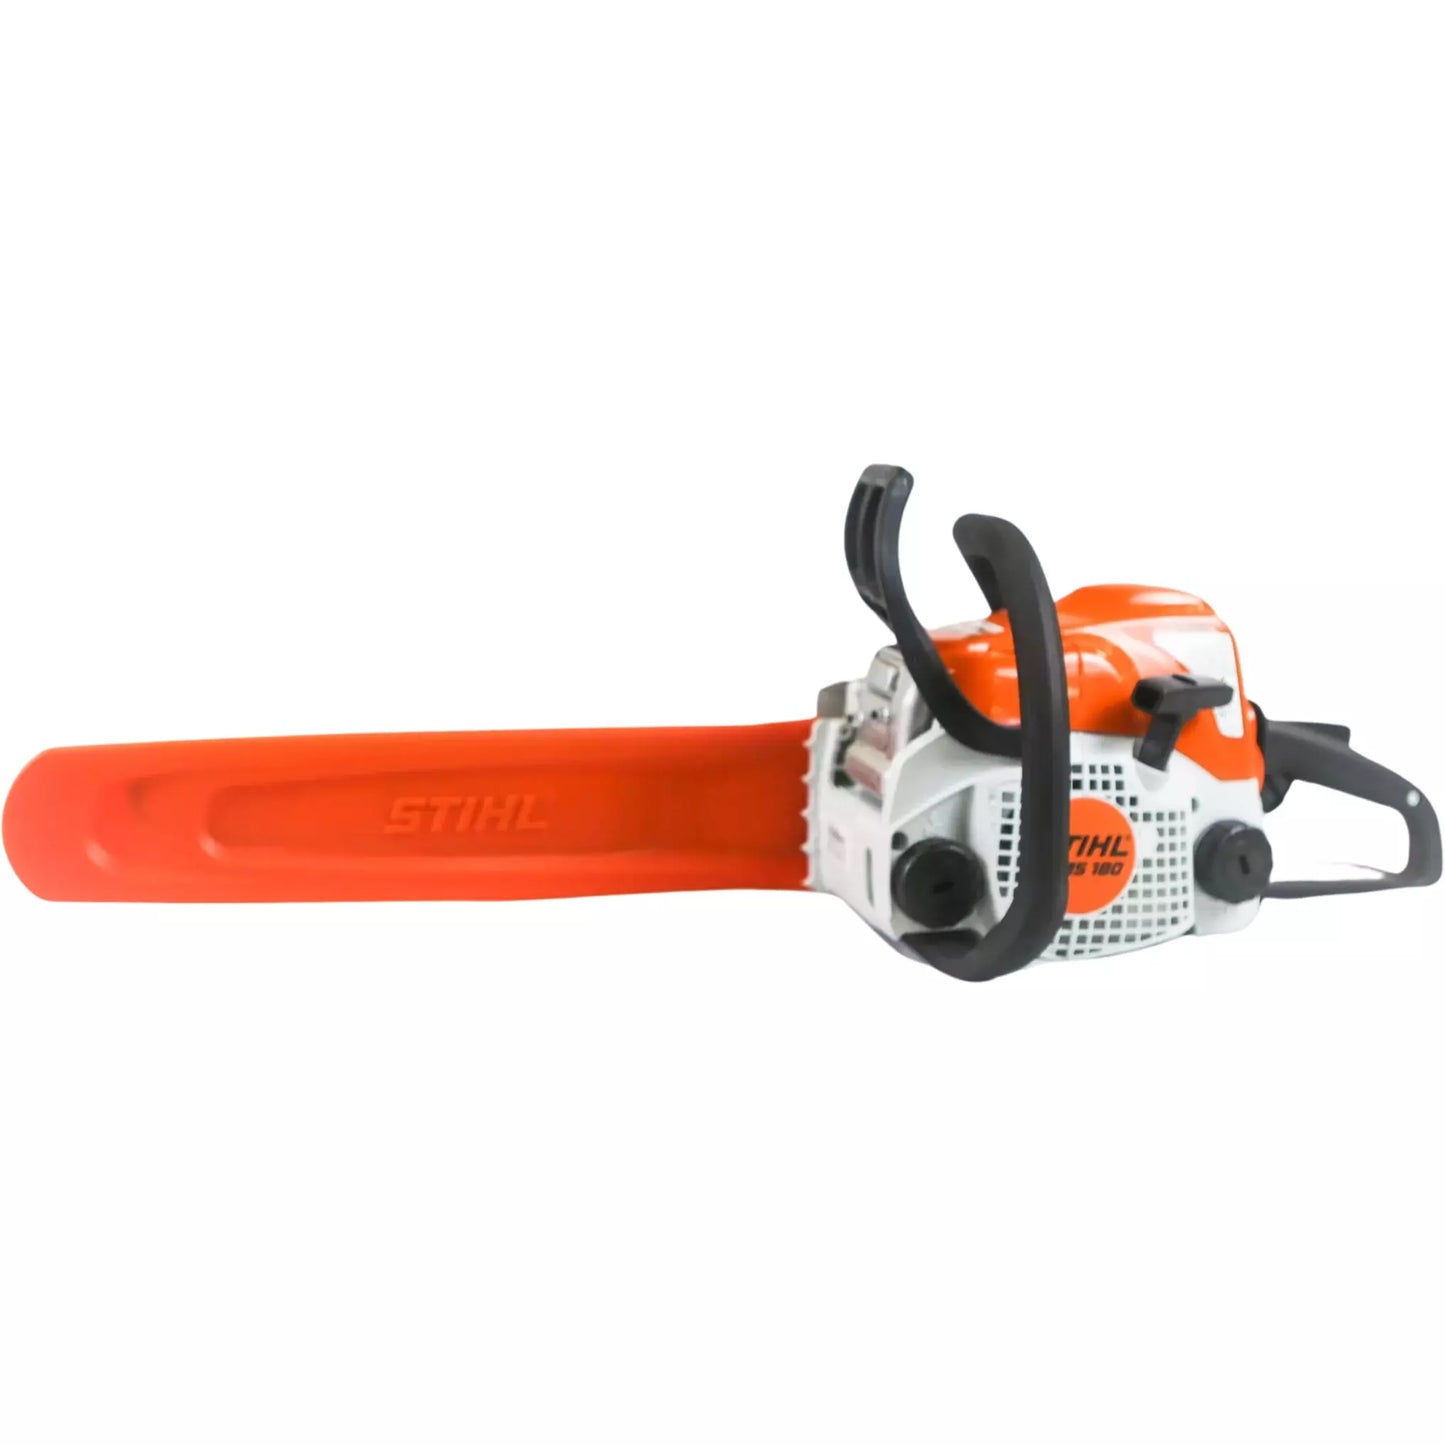 STIHL MS 180 16 in. 31.8 cc Gas Powered Chainsaw